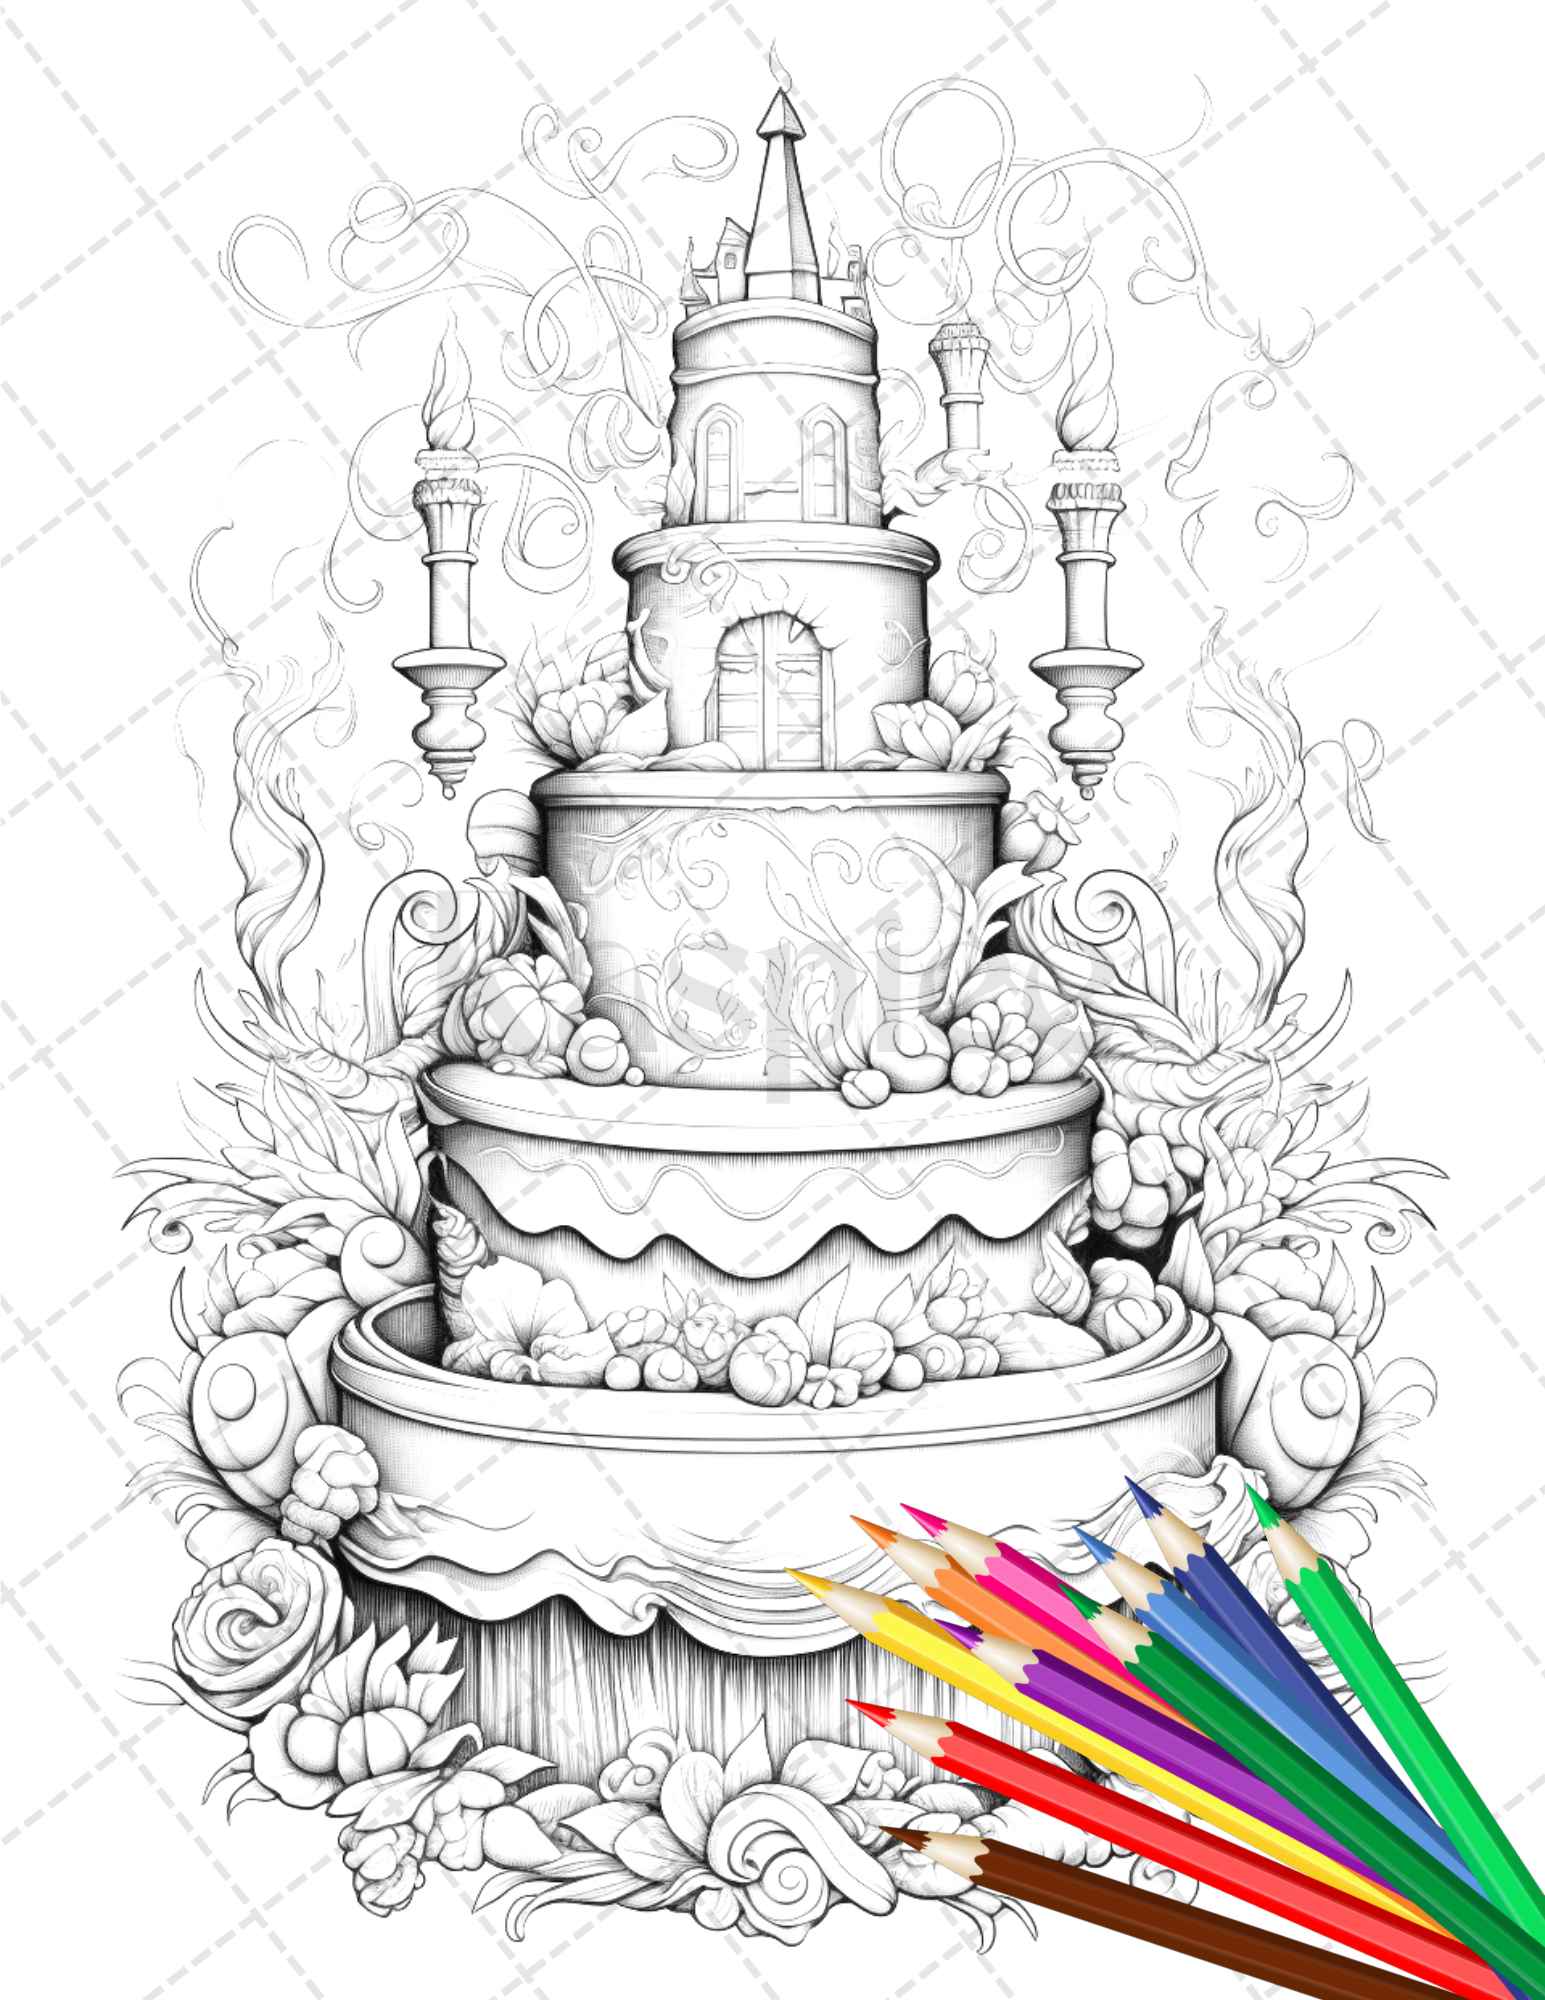 38 Whimsical Cakes Grayscale Coloring Pages for Adults, PDF File Instant Download - raspiee